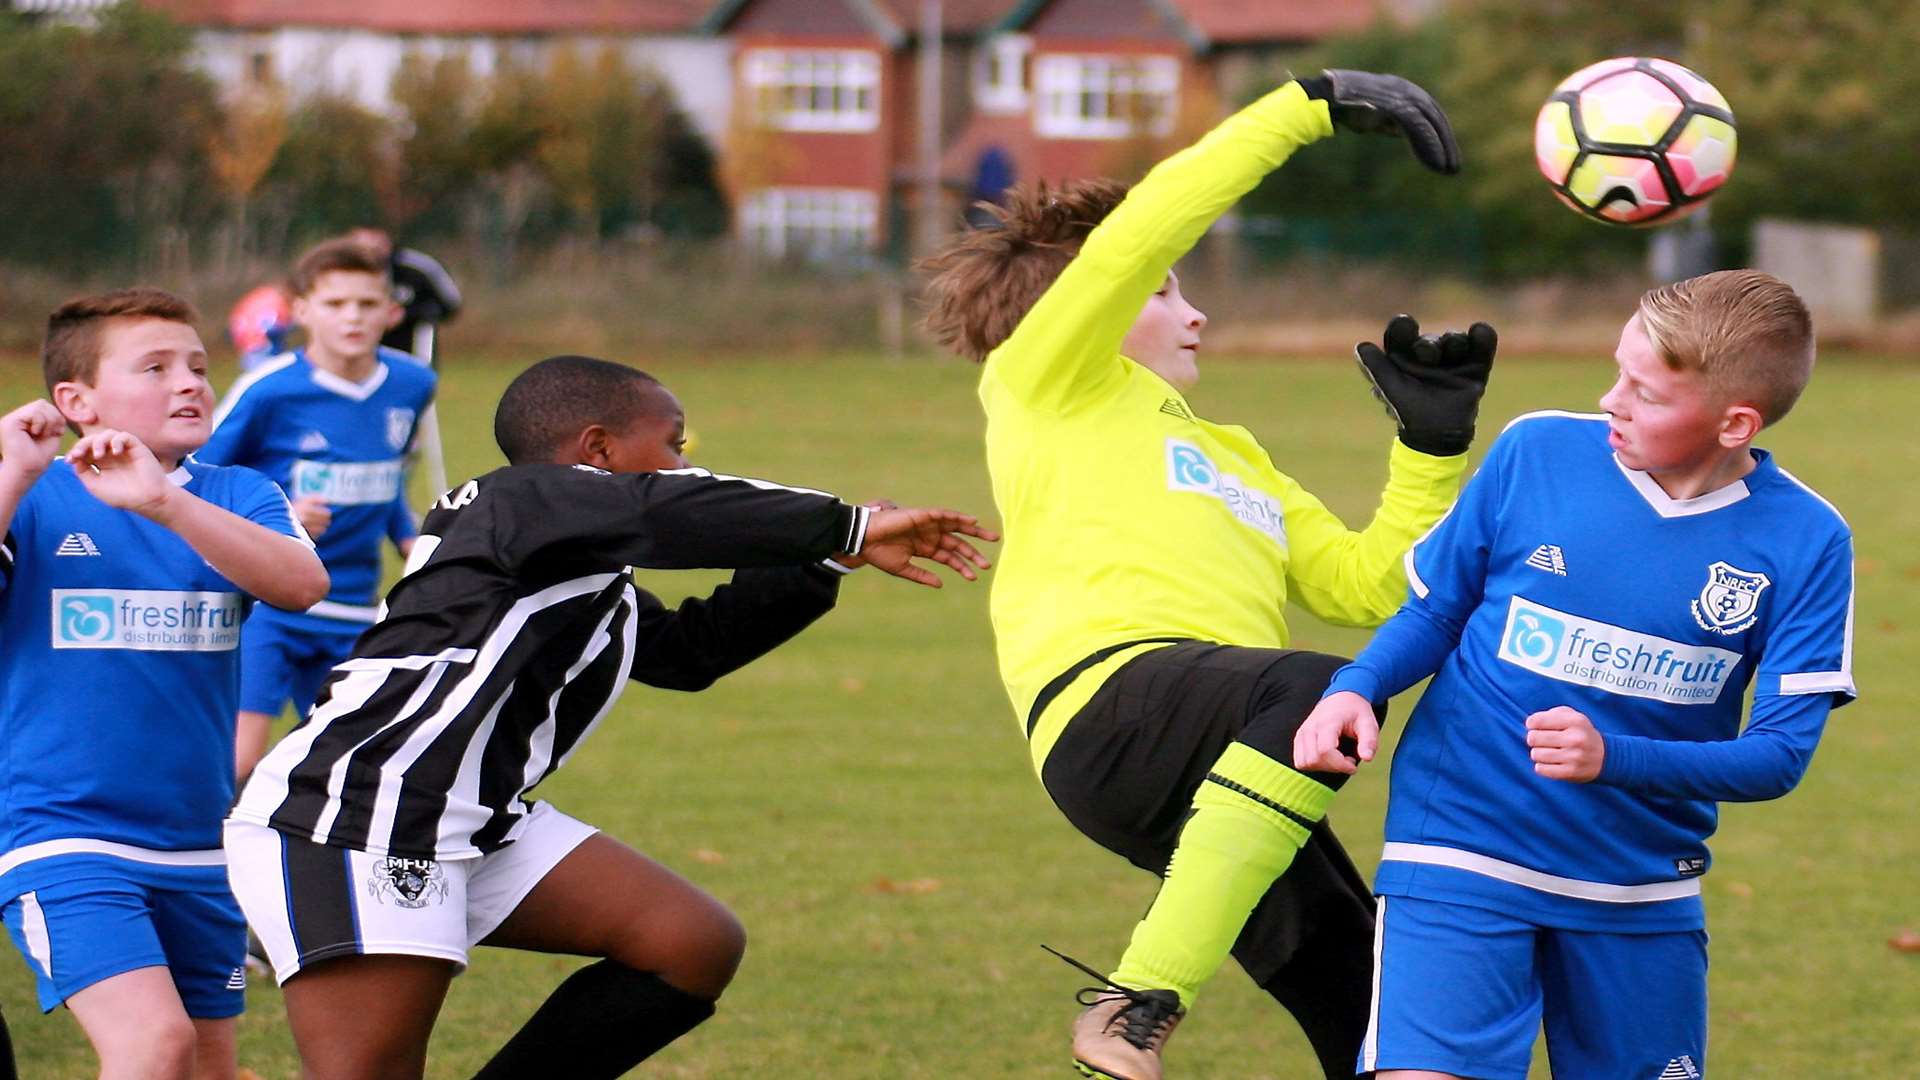 Milton & Fulston United Zebras and New Road clash in Under-13 Division 2 Picture: Phil Lee